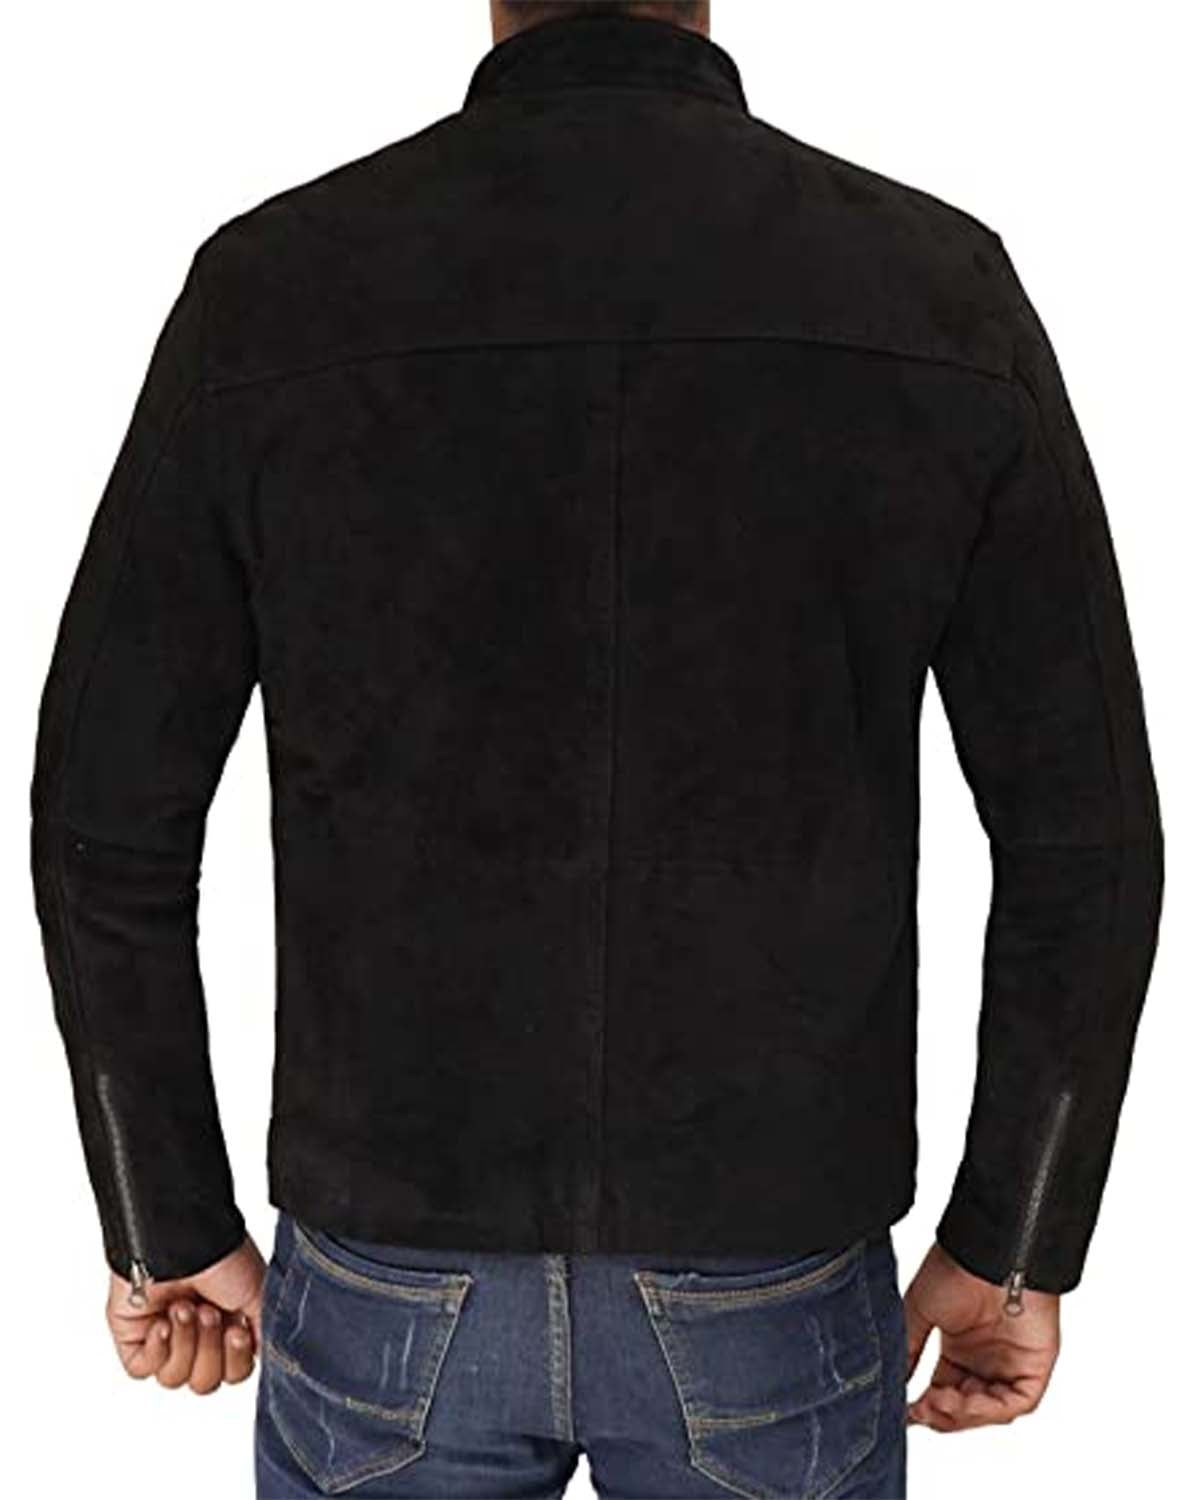 Mission Impossible 6 Tom Cruise Leather Jeans Jacket For Mens